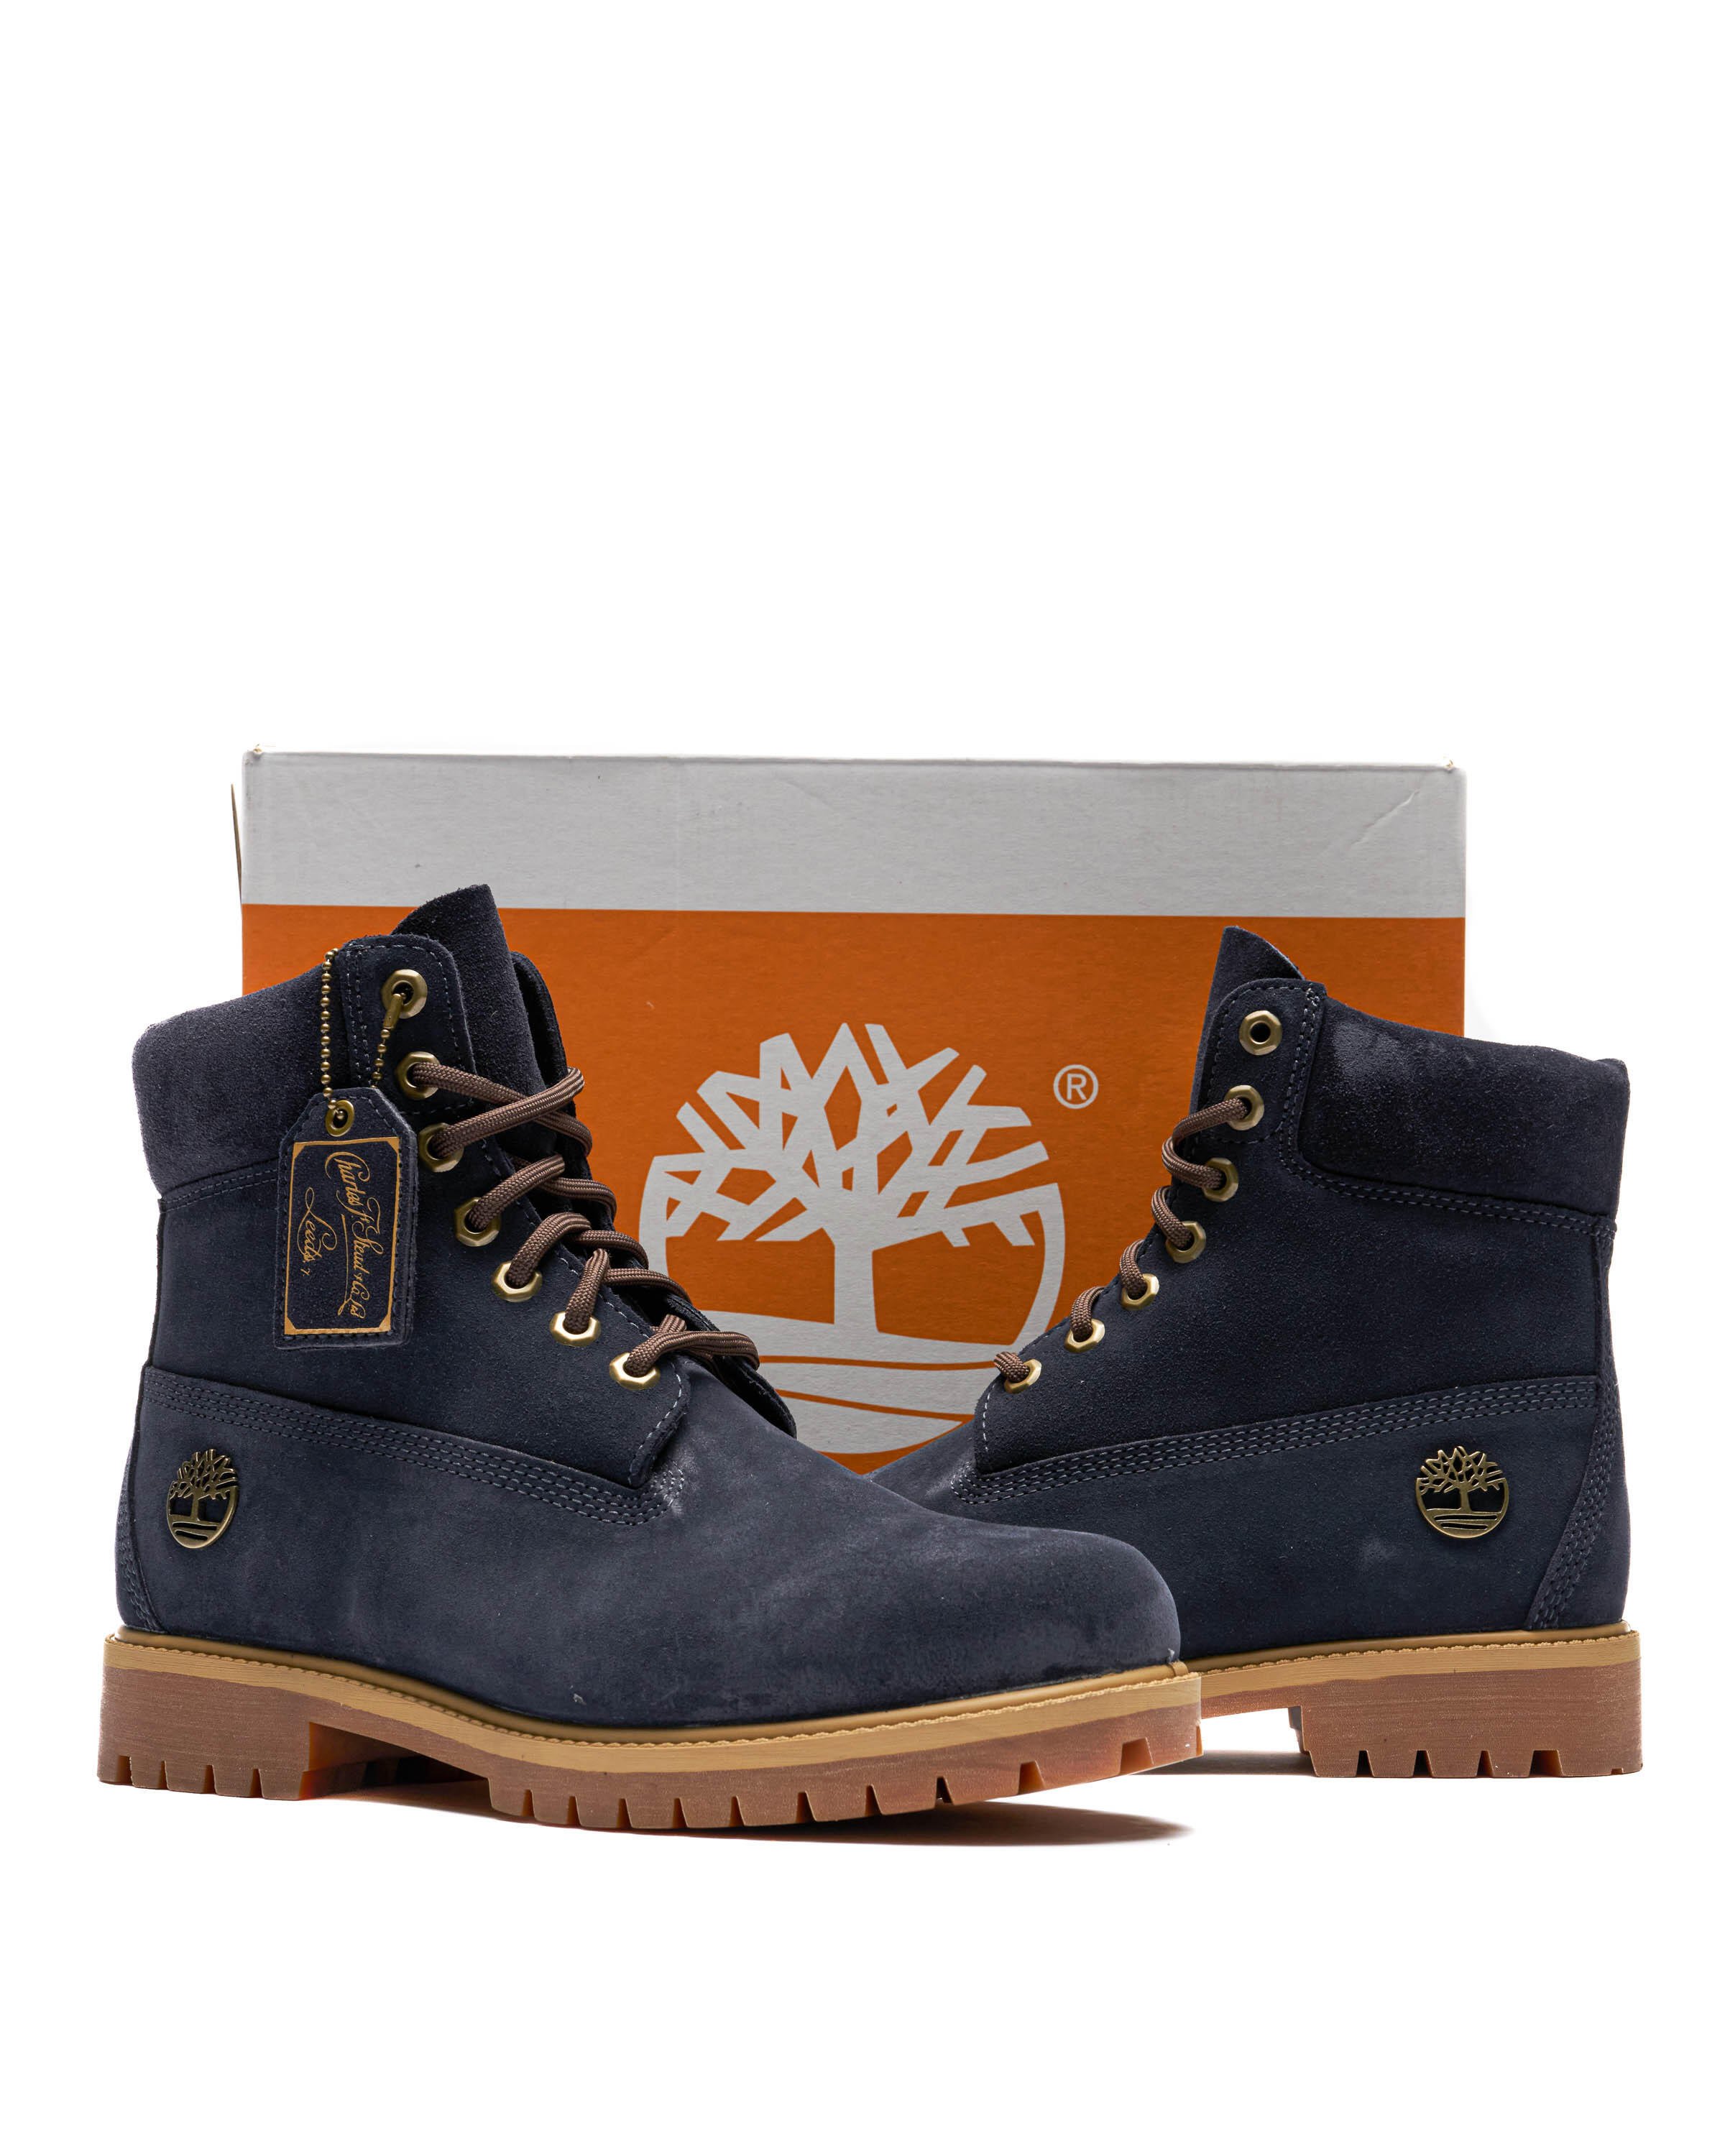 Timberland Heritage 6 INCH LACE UP WATERPROOF BOOT